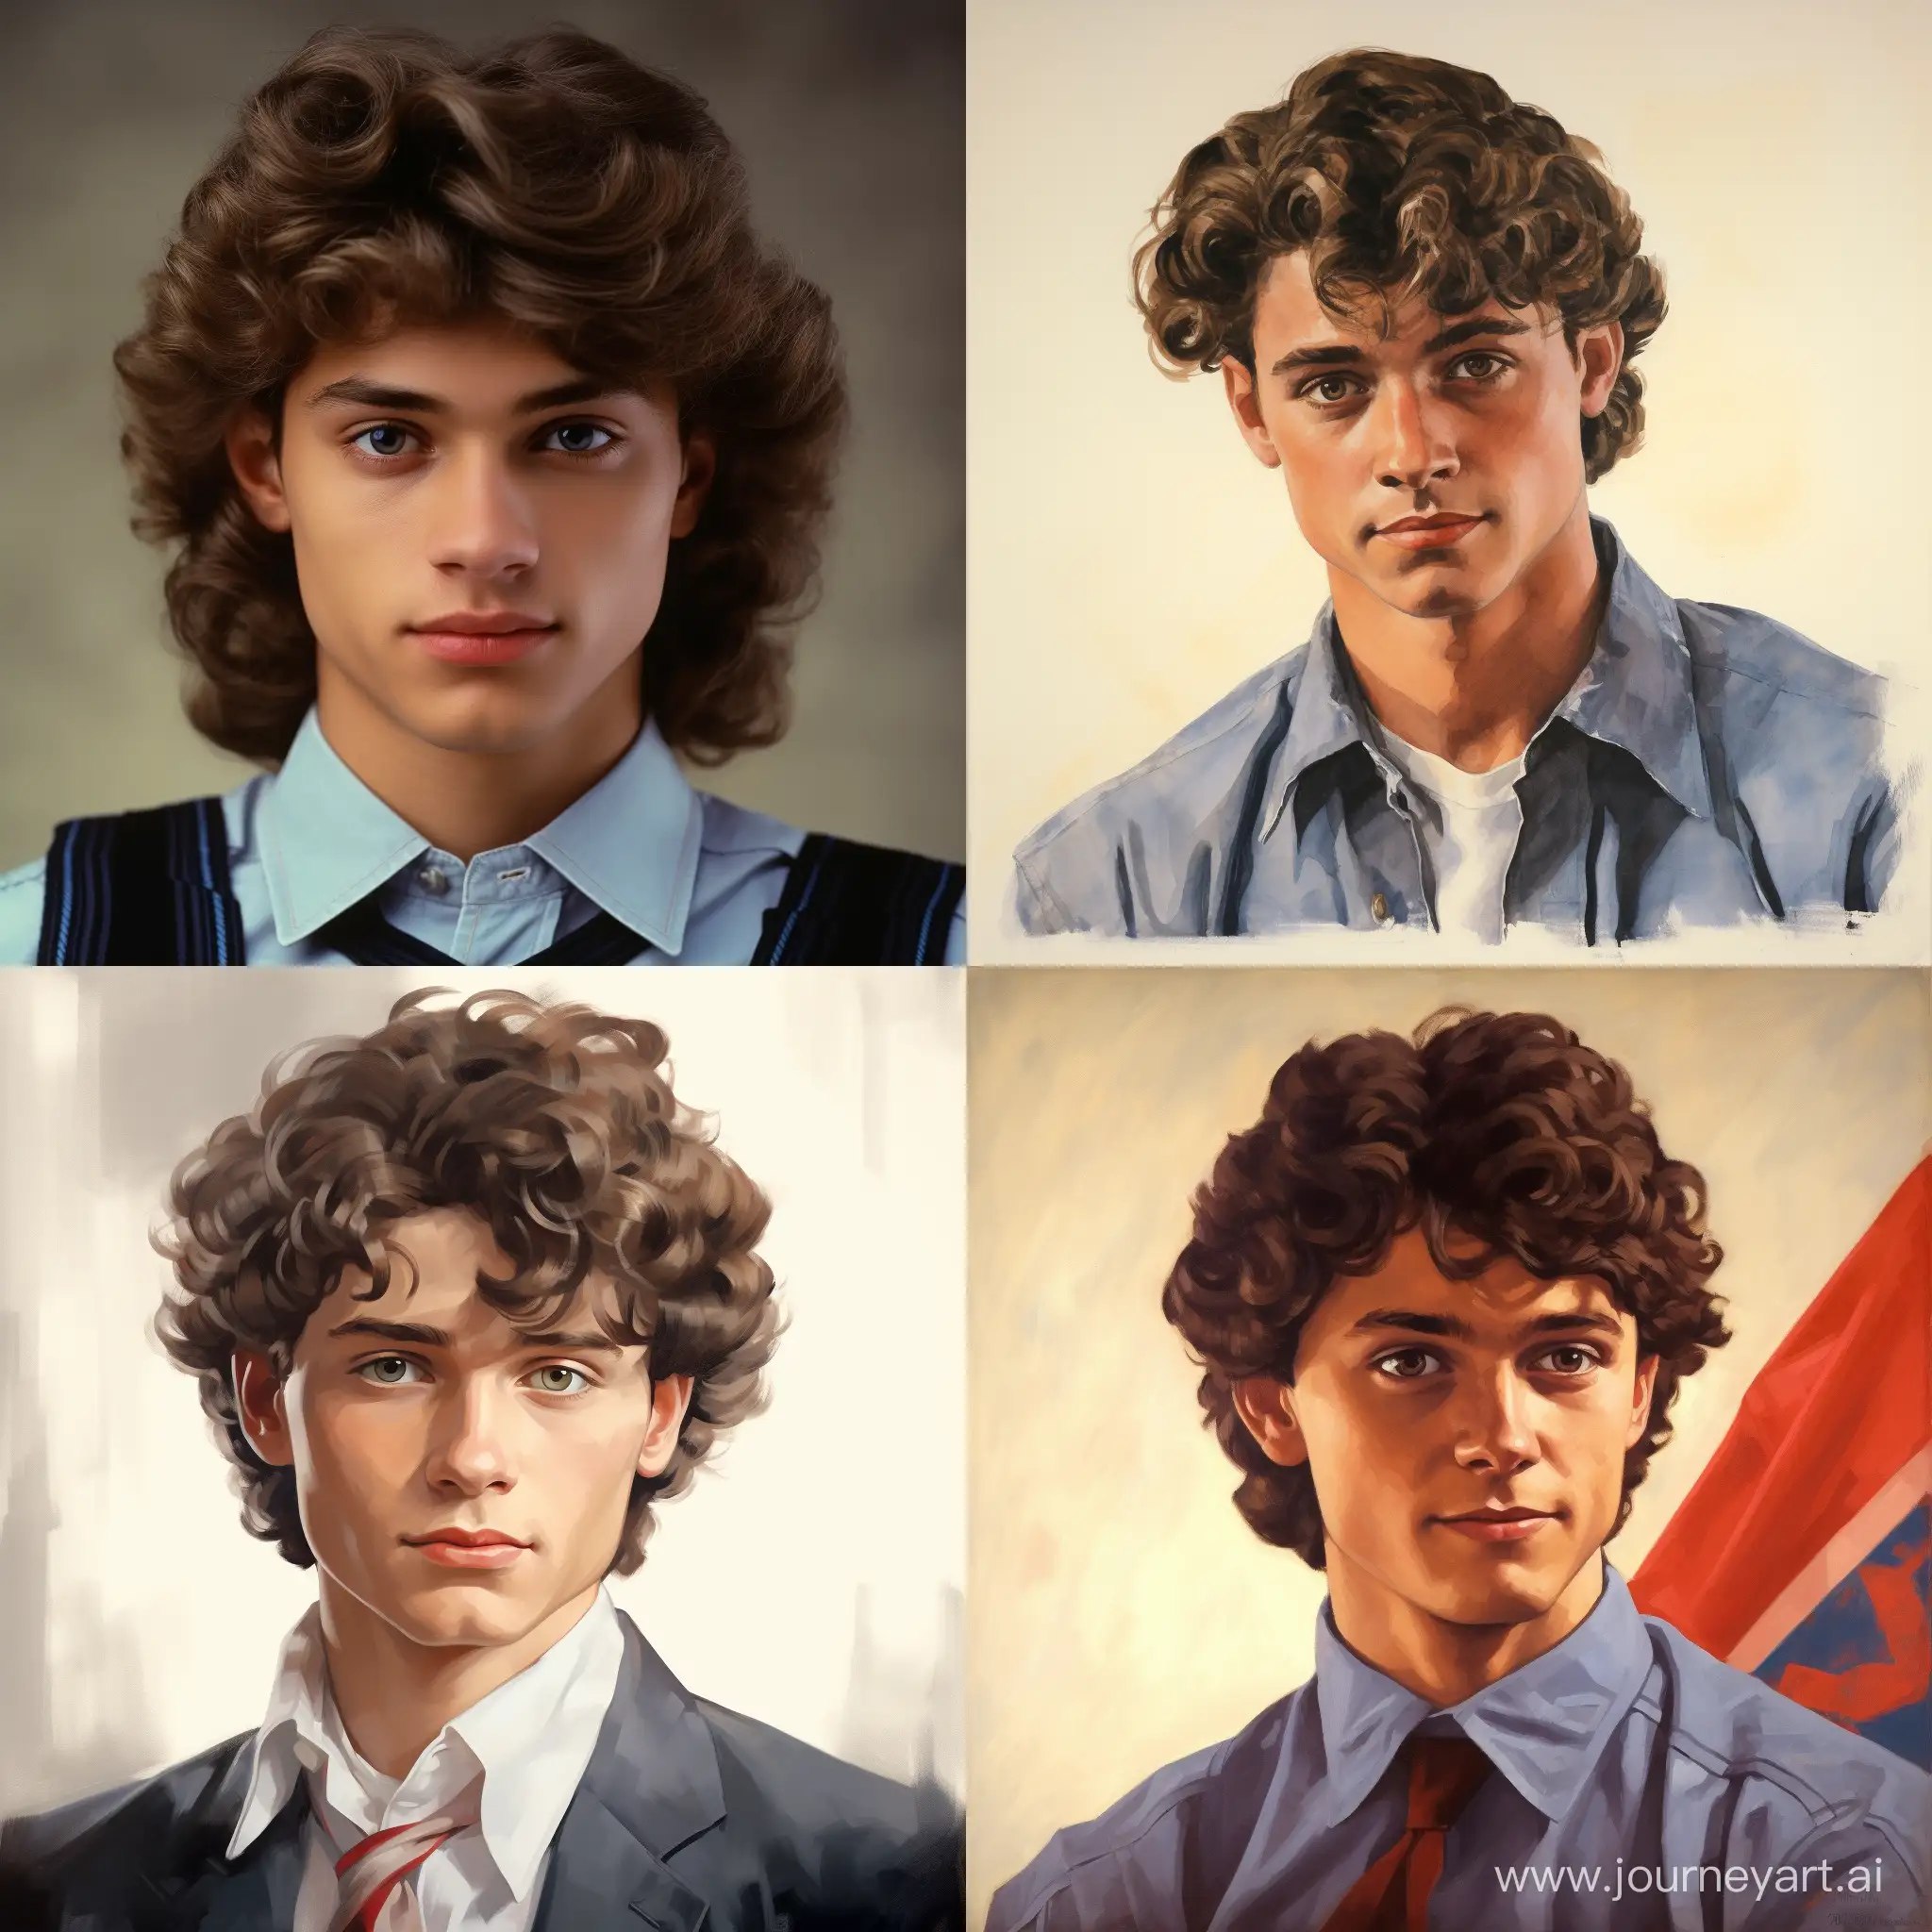 Stylish-Soviet-Student-of-the-80s-Medium-Height-Neat-Attire-CleanShaven-BlueEyed-CurlyHaired-Charm